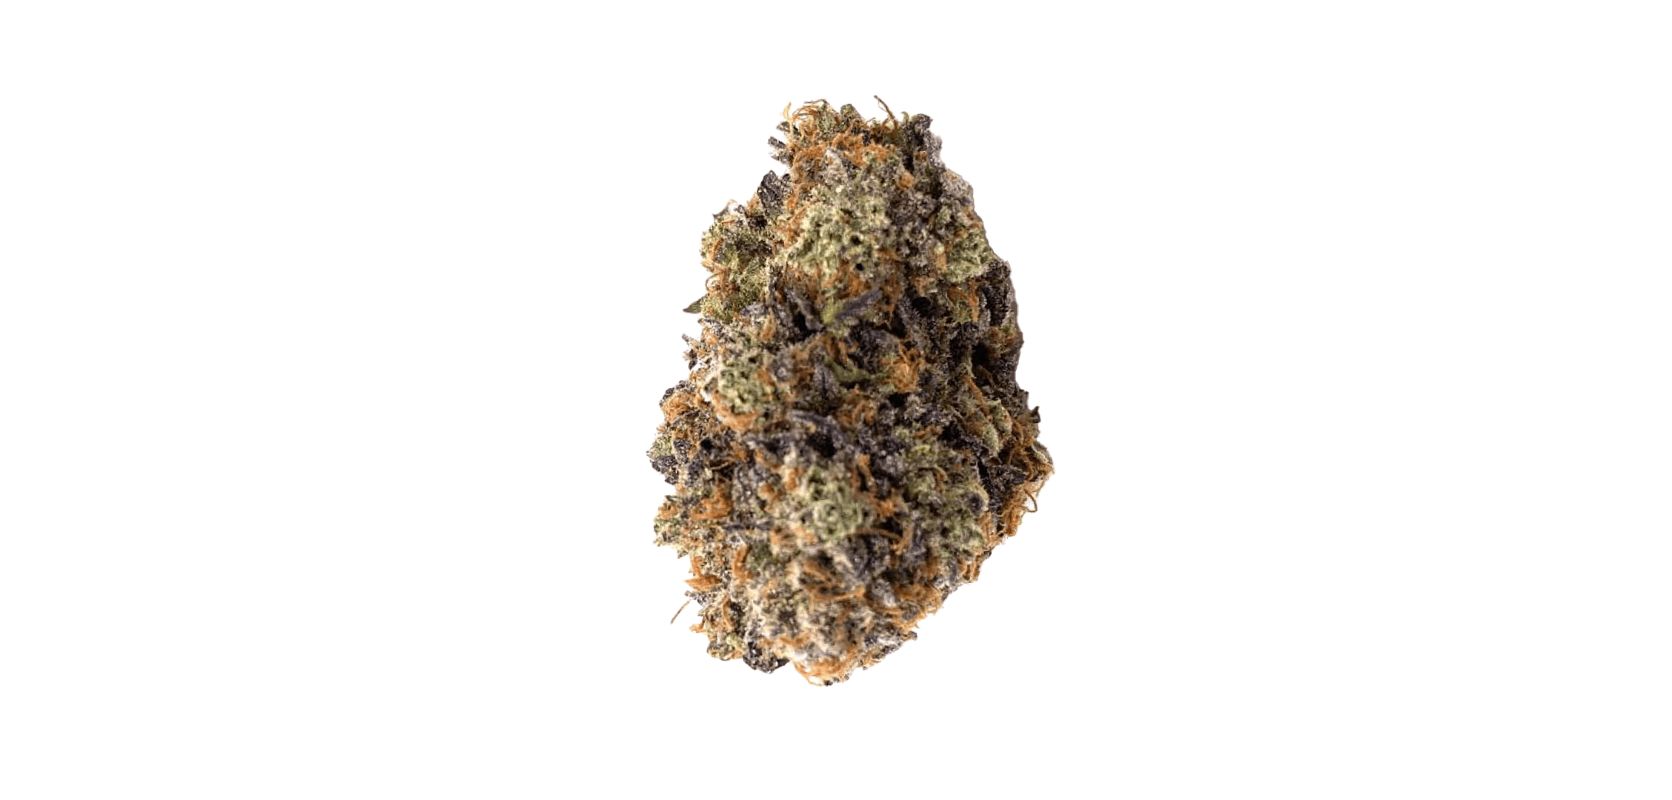 The Death Bubba weed strain is a powerhouse Indica, known for its sedative effects and heavy-hitting THC content. 